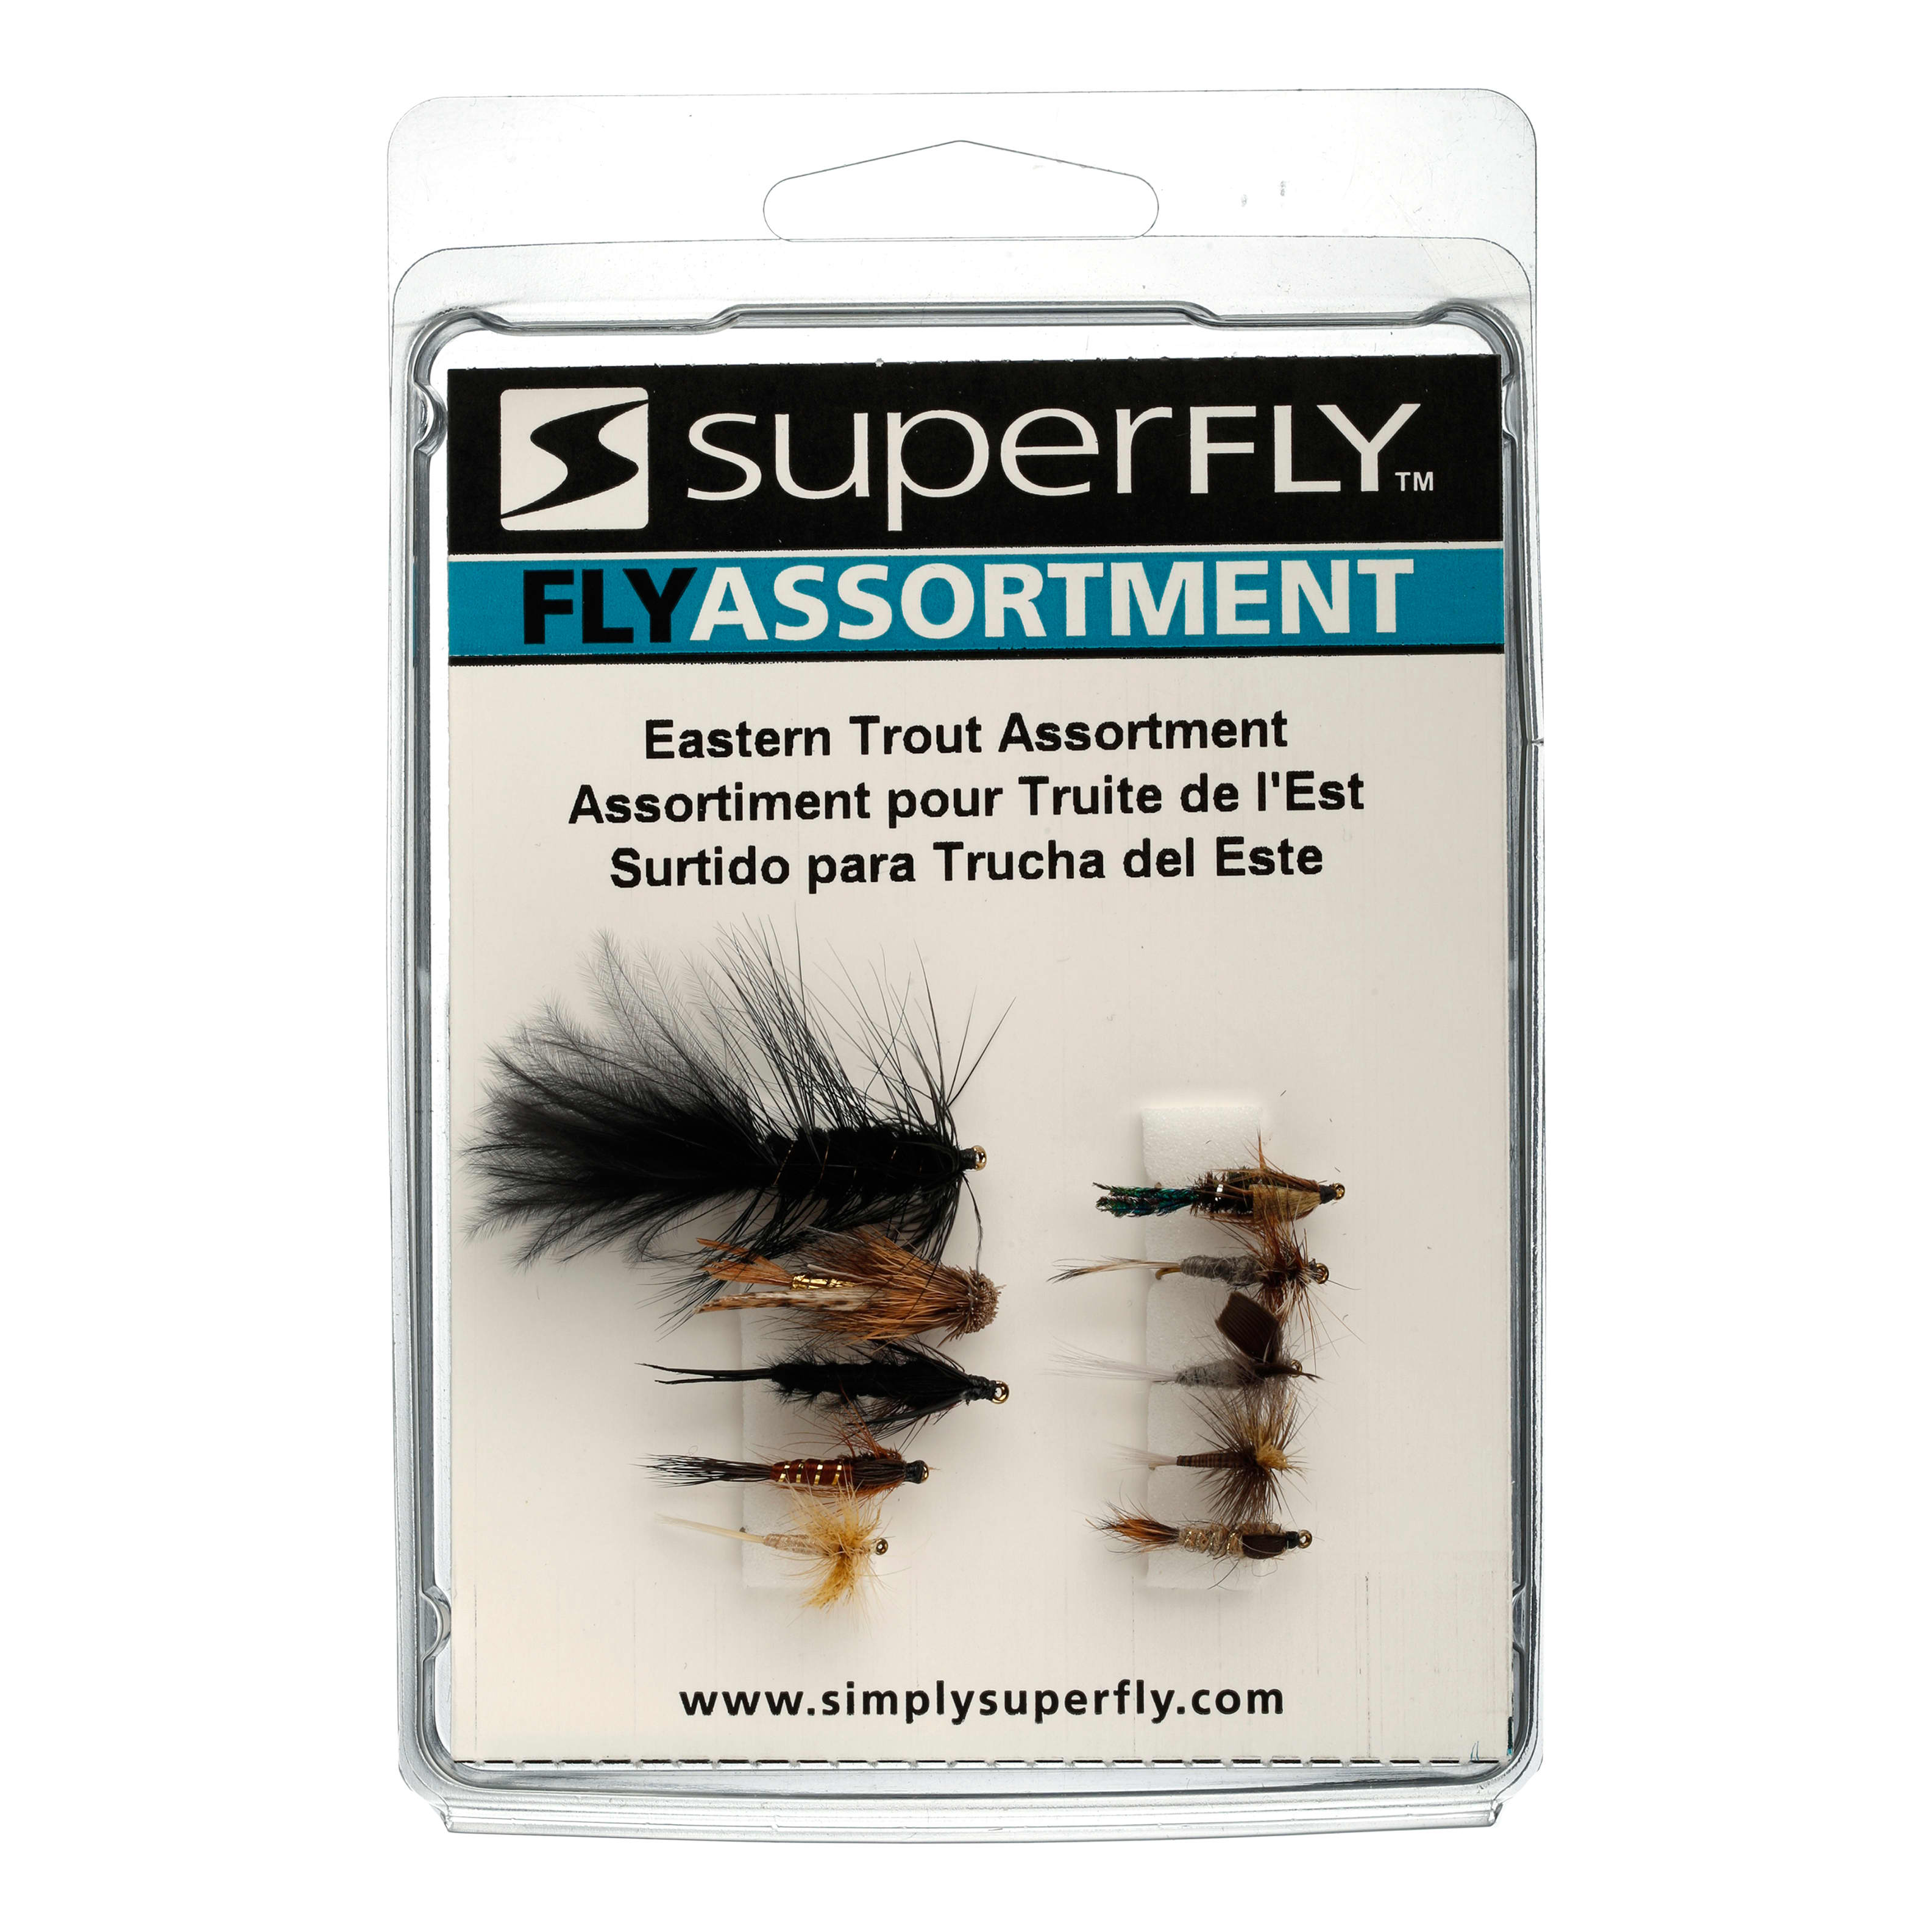 Superfly Premium Eastern Trout Selection